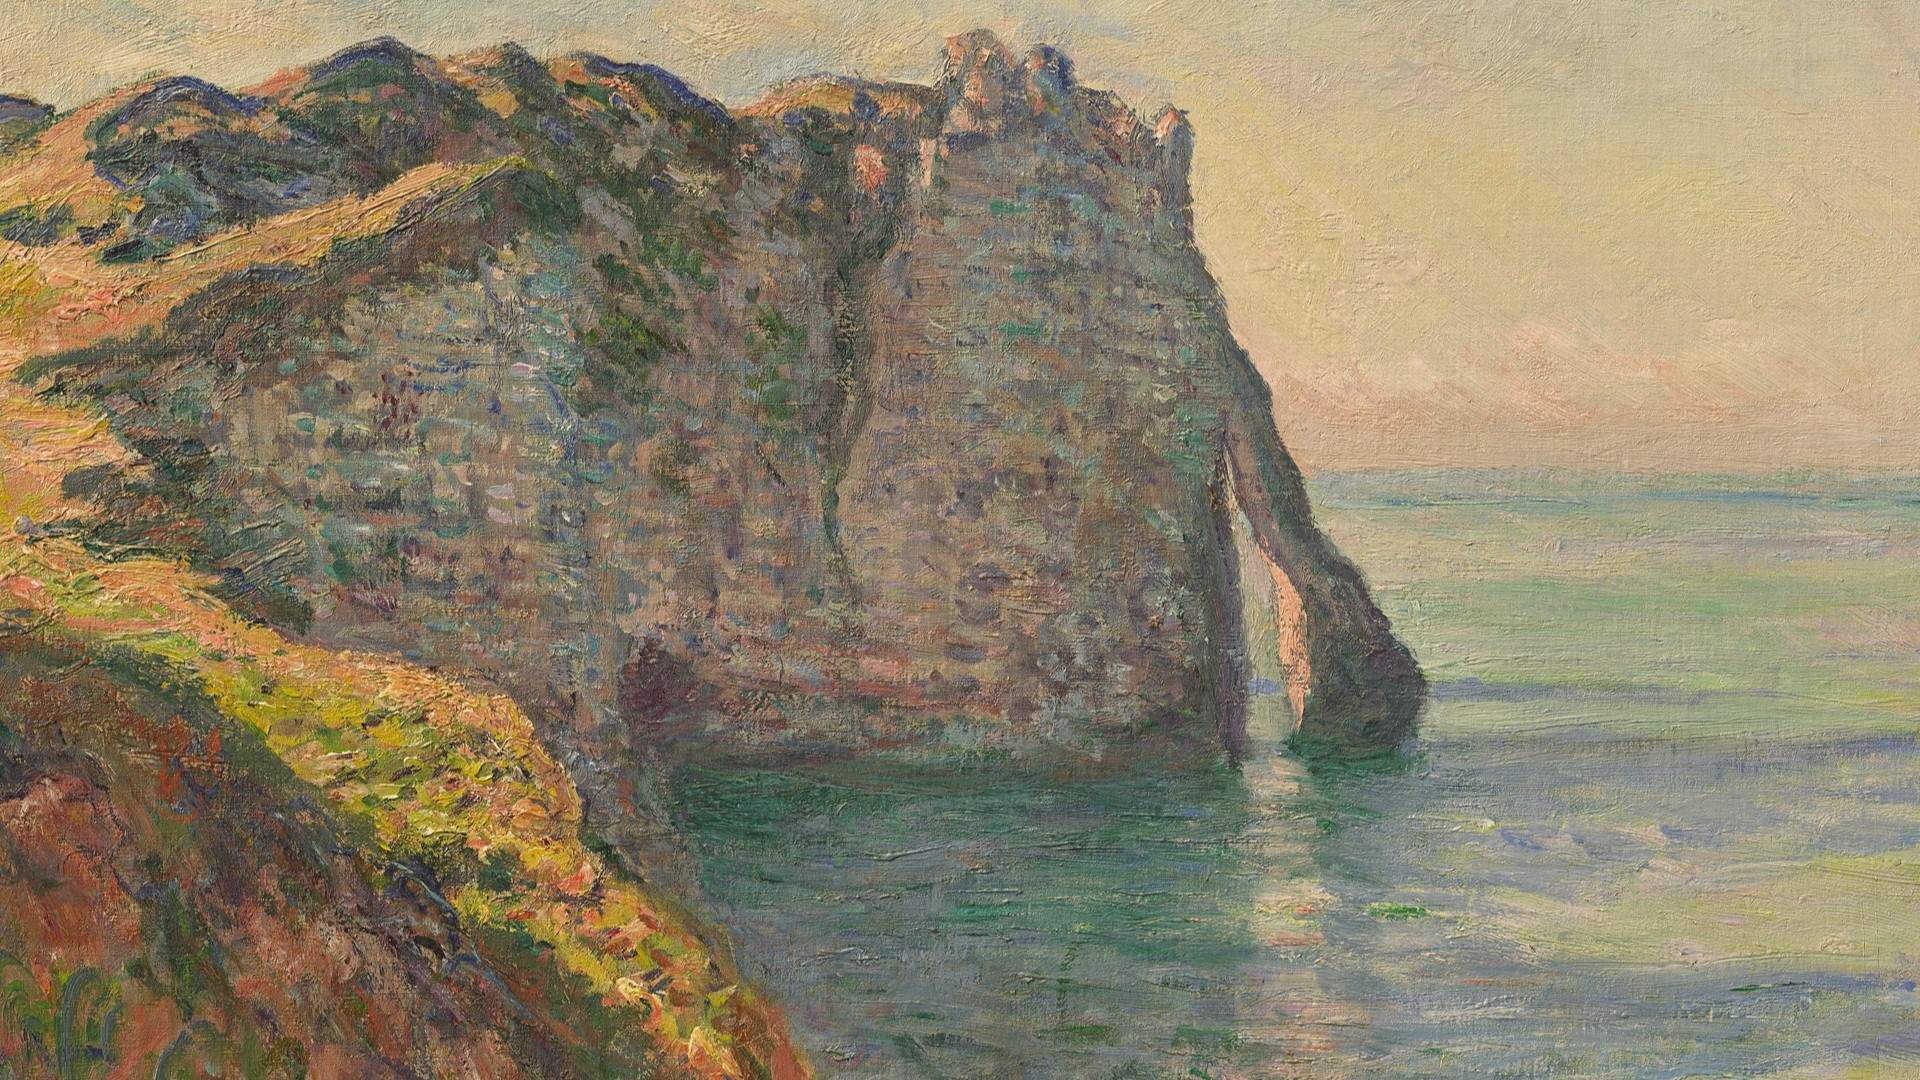 Monet at Étretat features paintings of a small seaside town and spectacular cliffs in France. #k5evening